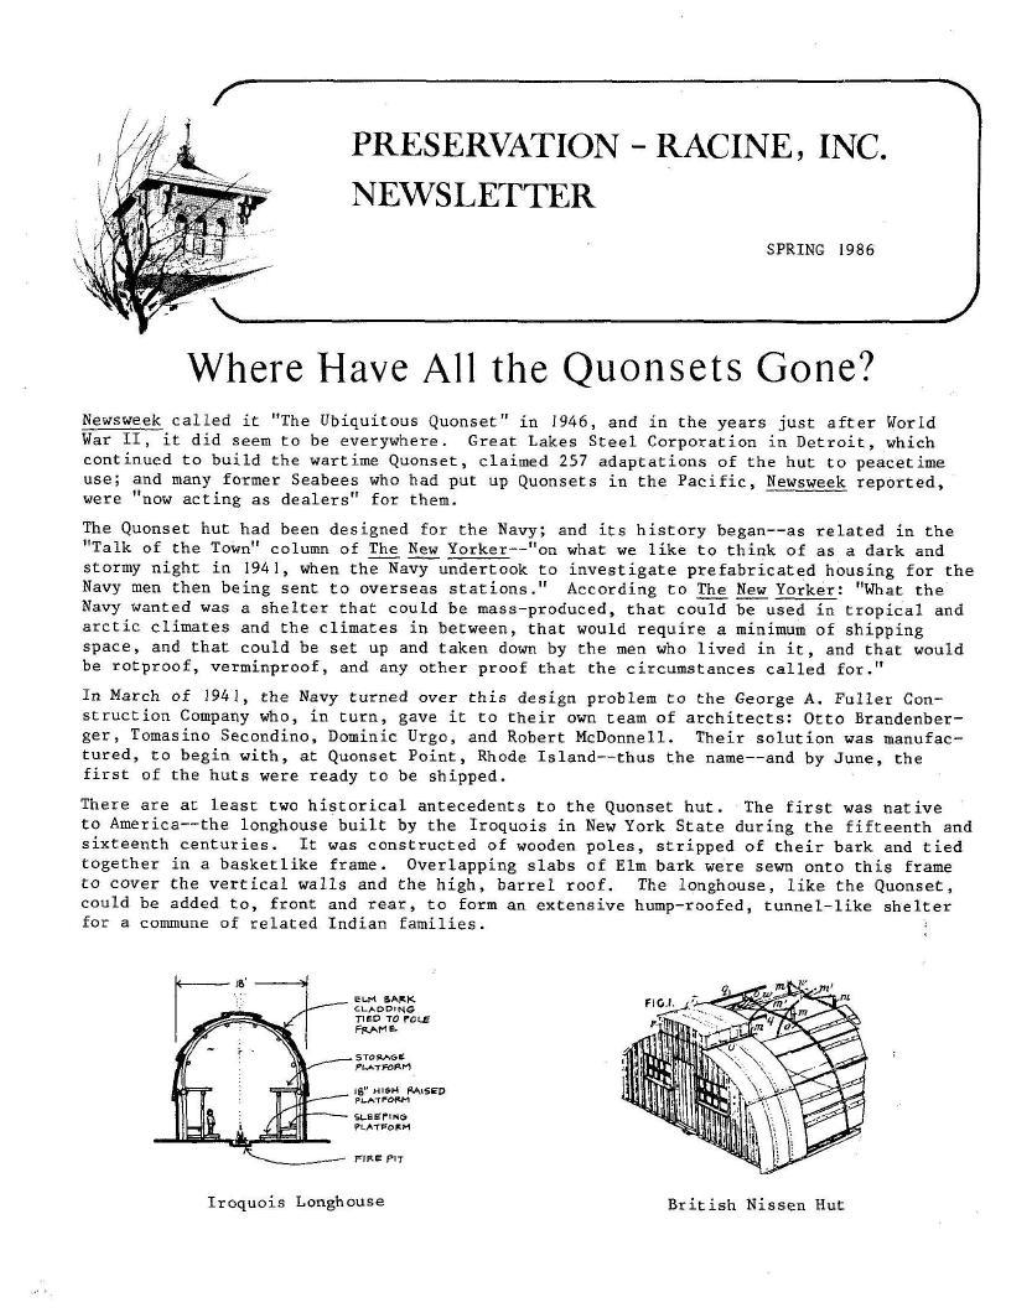 Where Have All the Quonsets Gone?